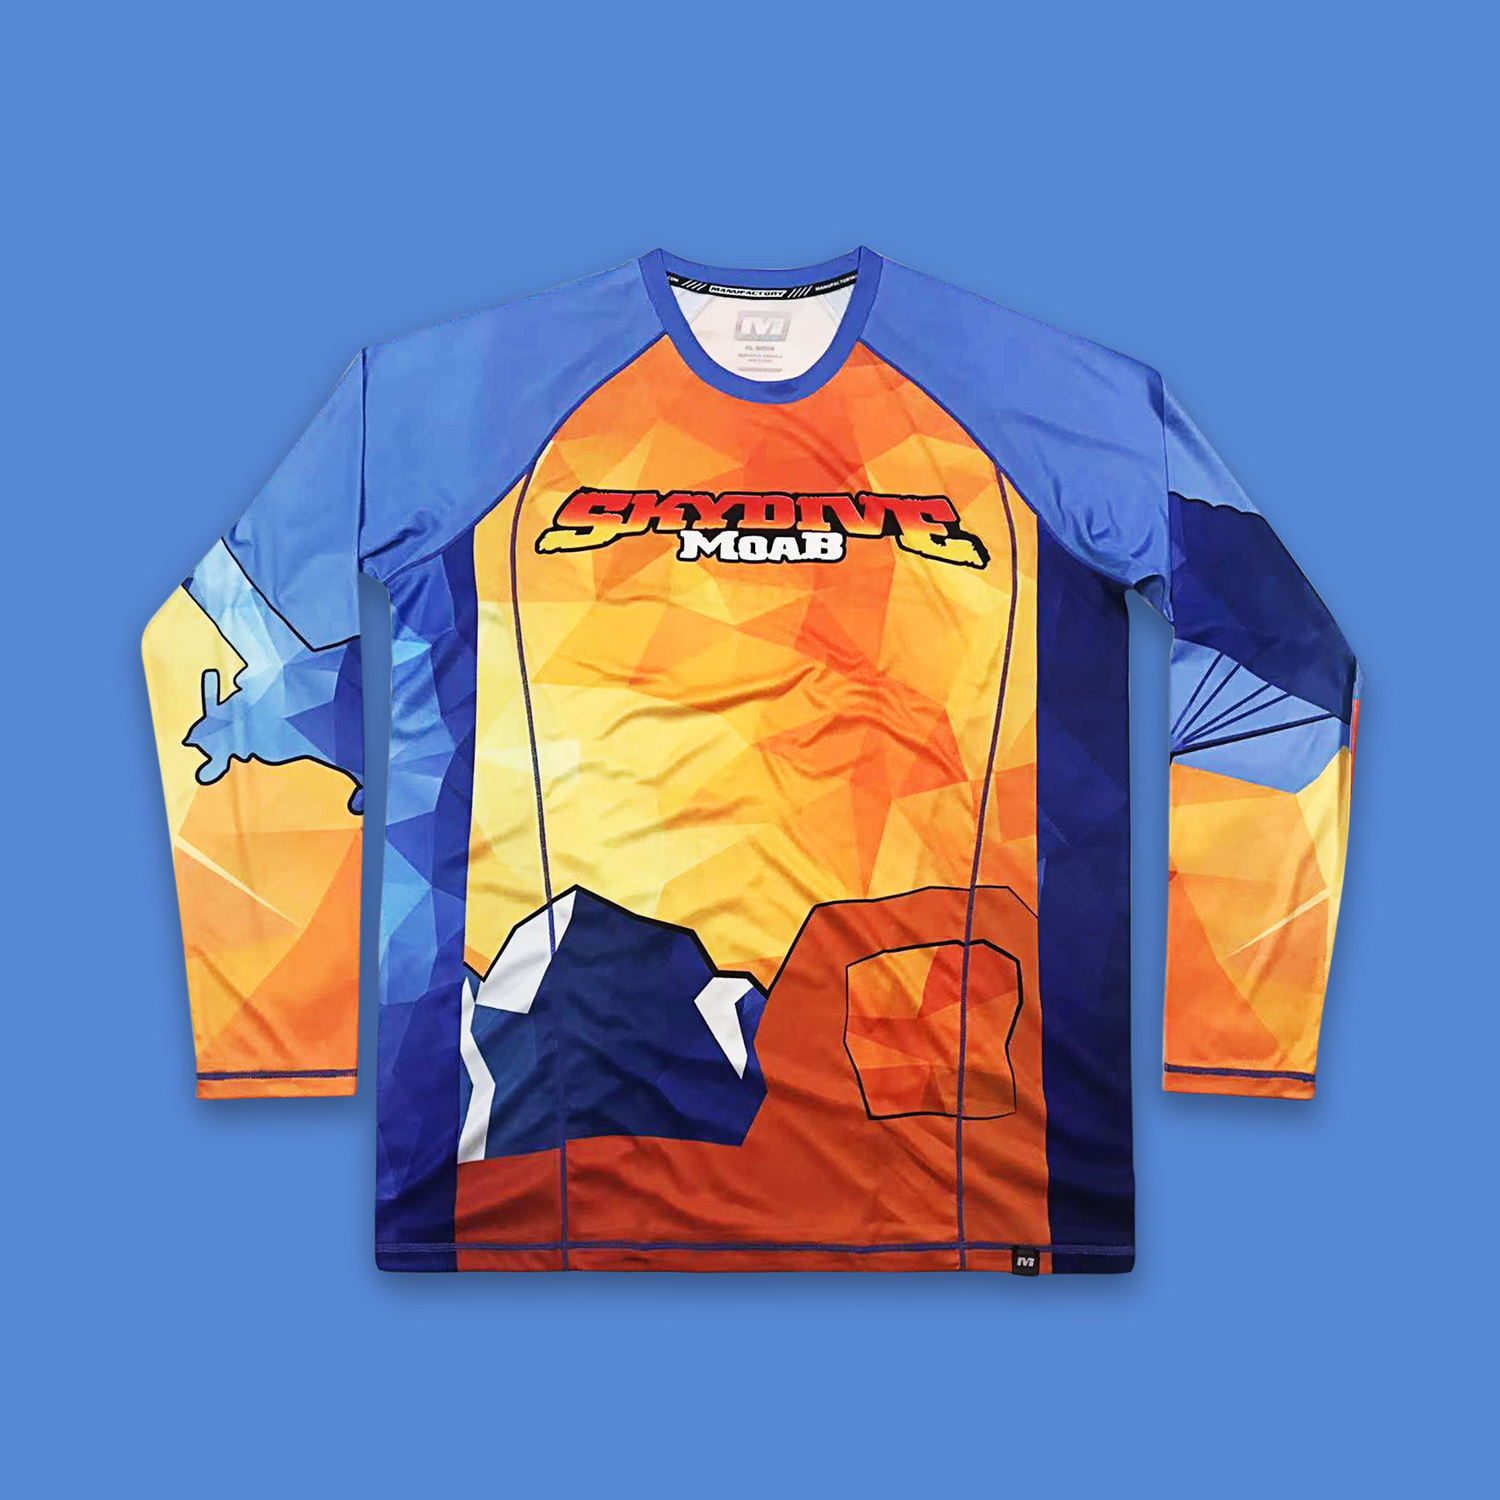 Skydive Moab Official Merchandise